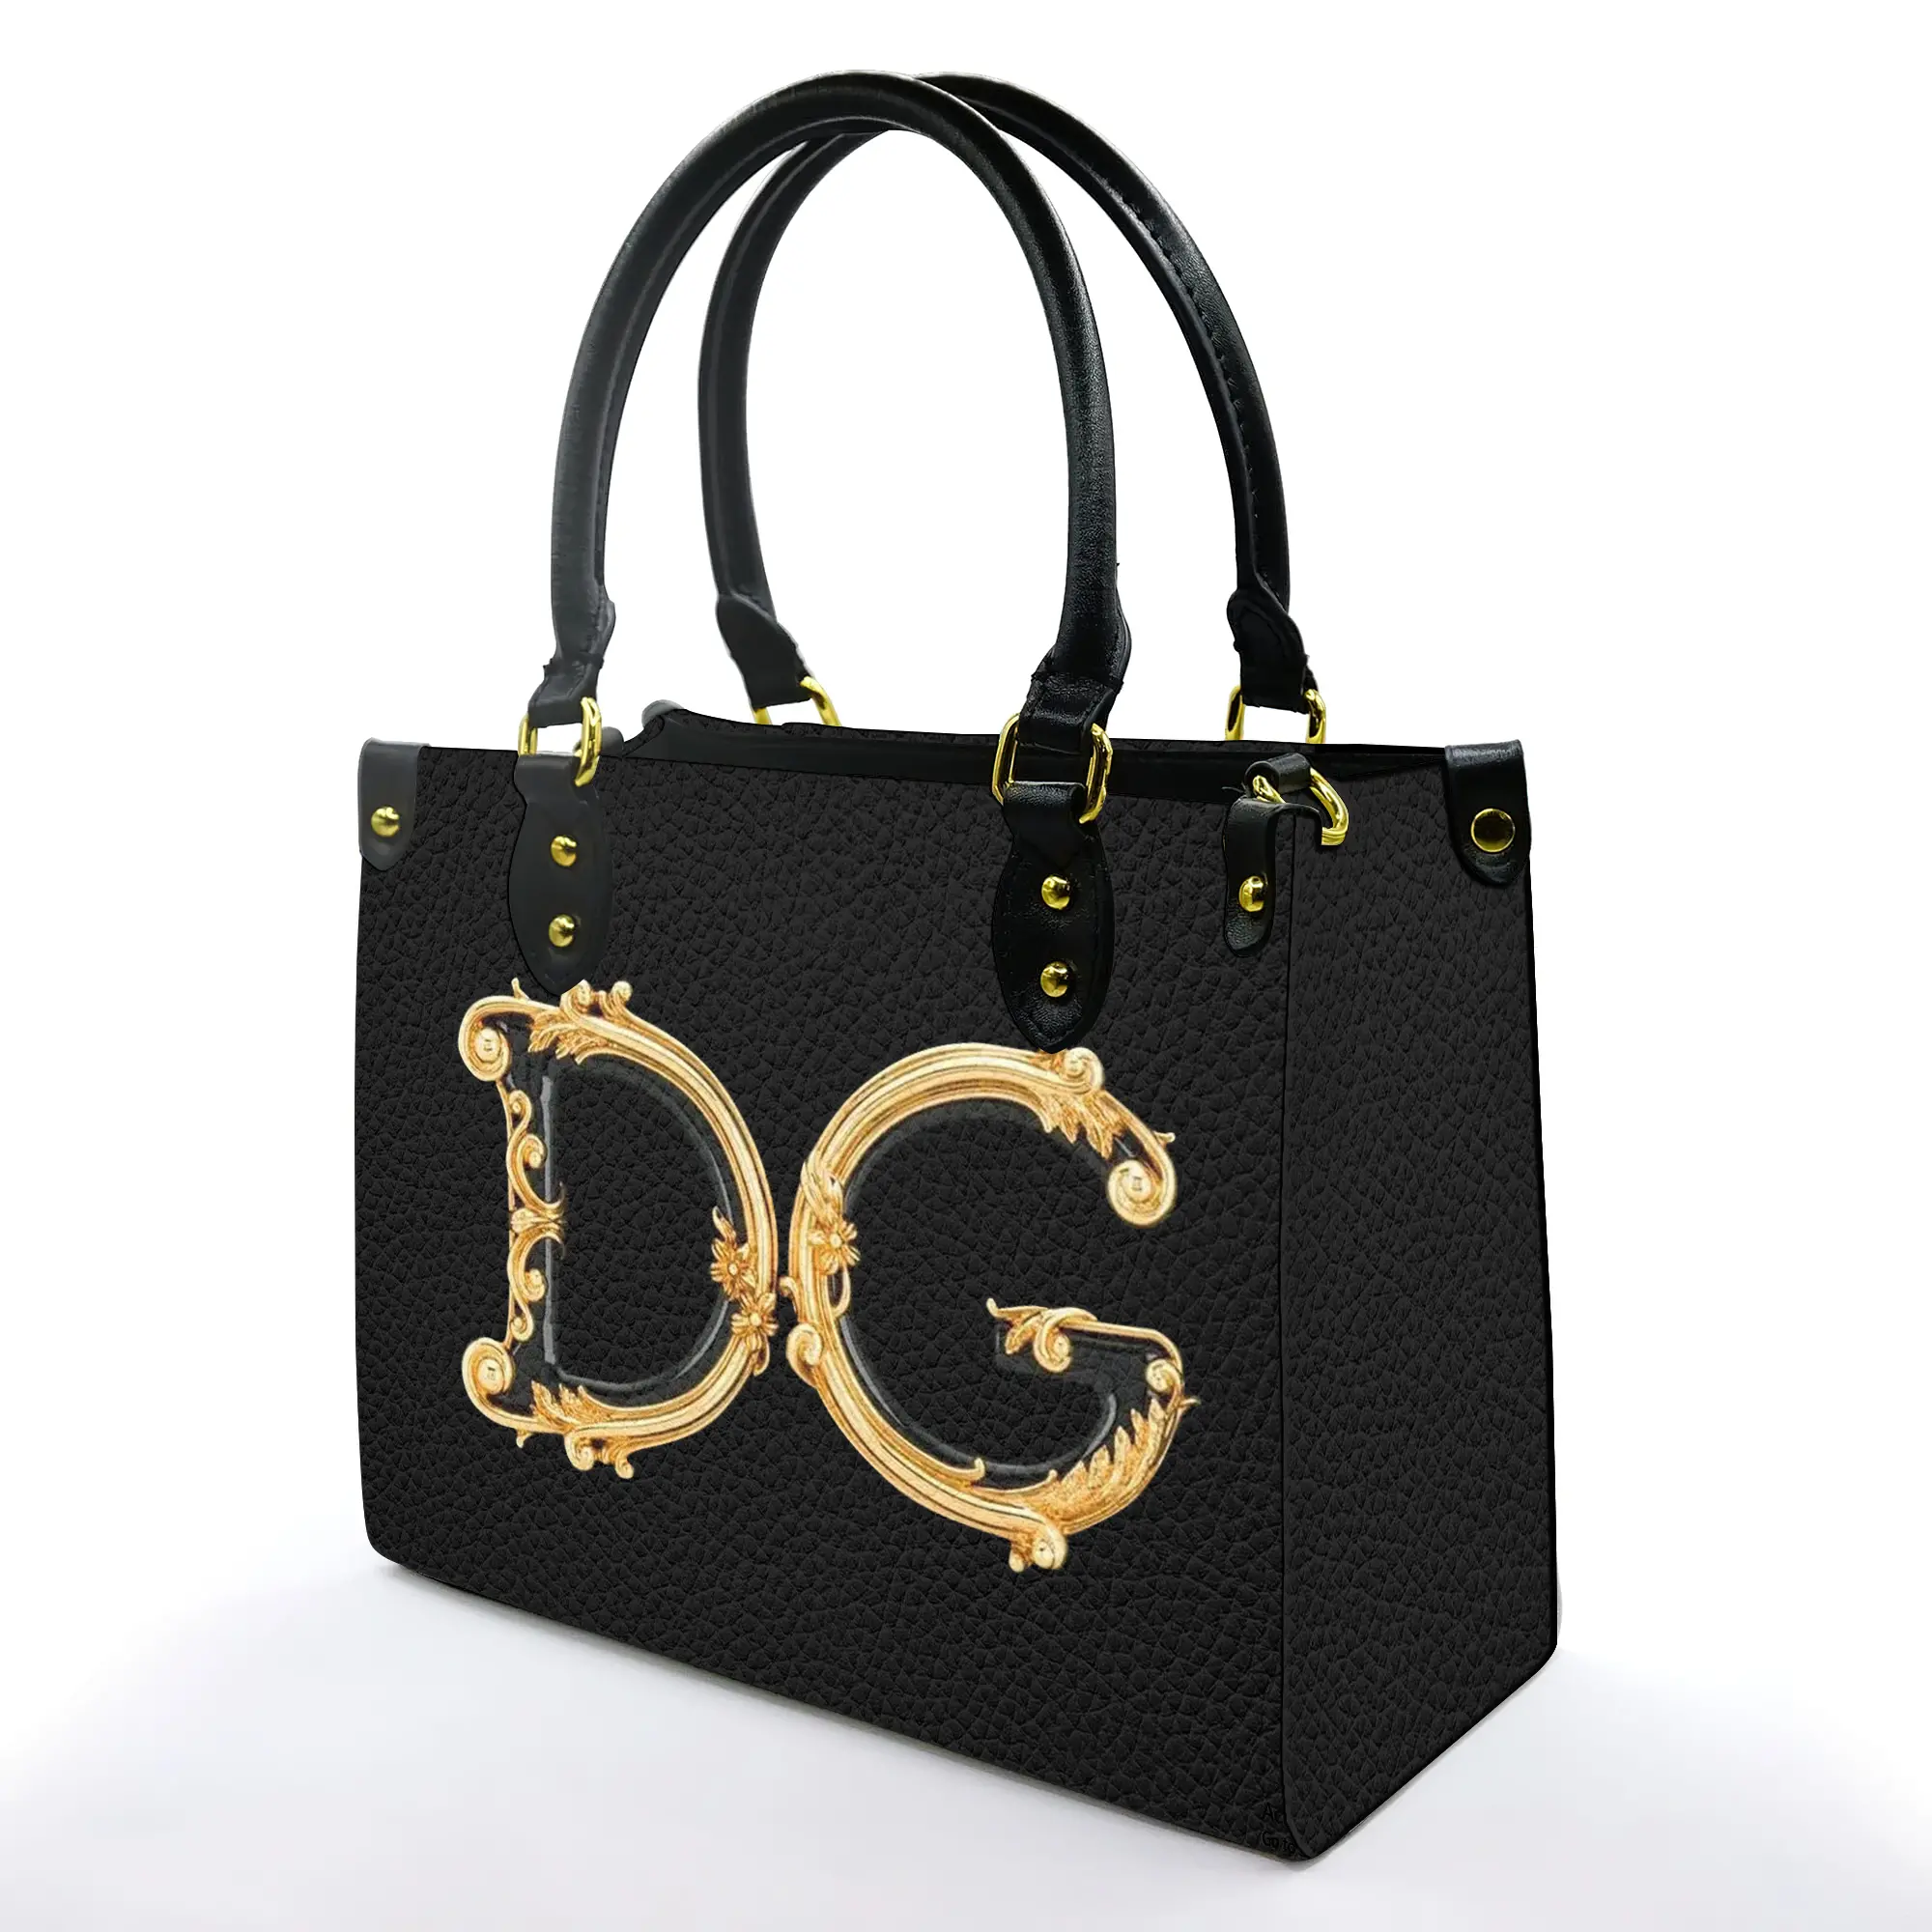 Limited Edition Black Dolce Gabbana Leather Handbag's Overview - Batamtee Shop - Threads & Totes: Your Style Destination